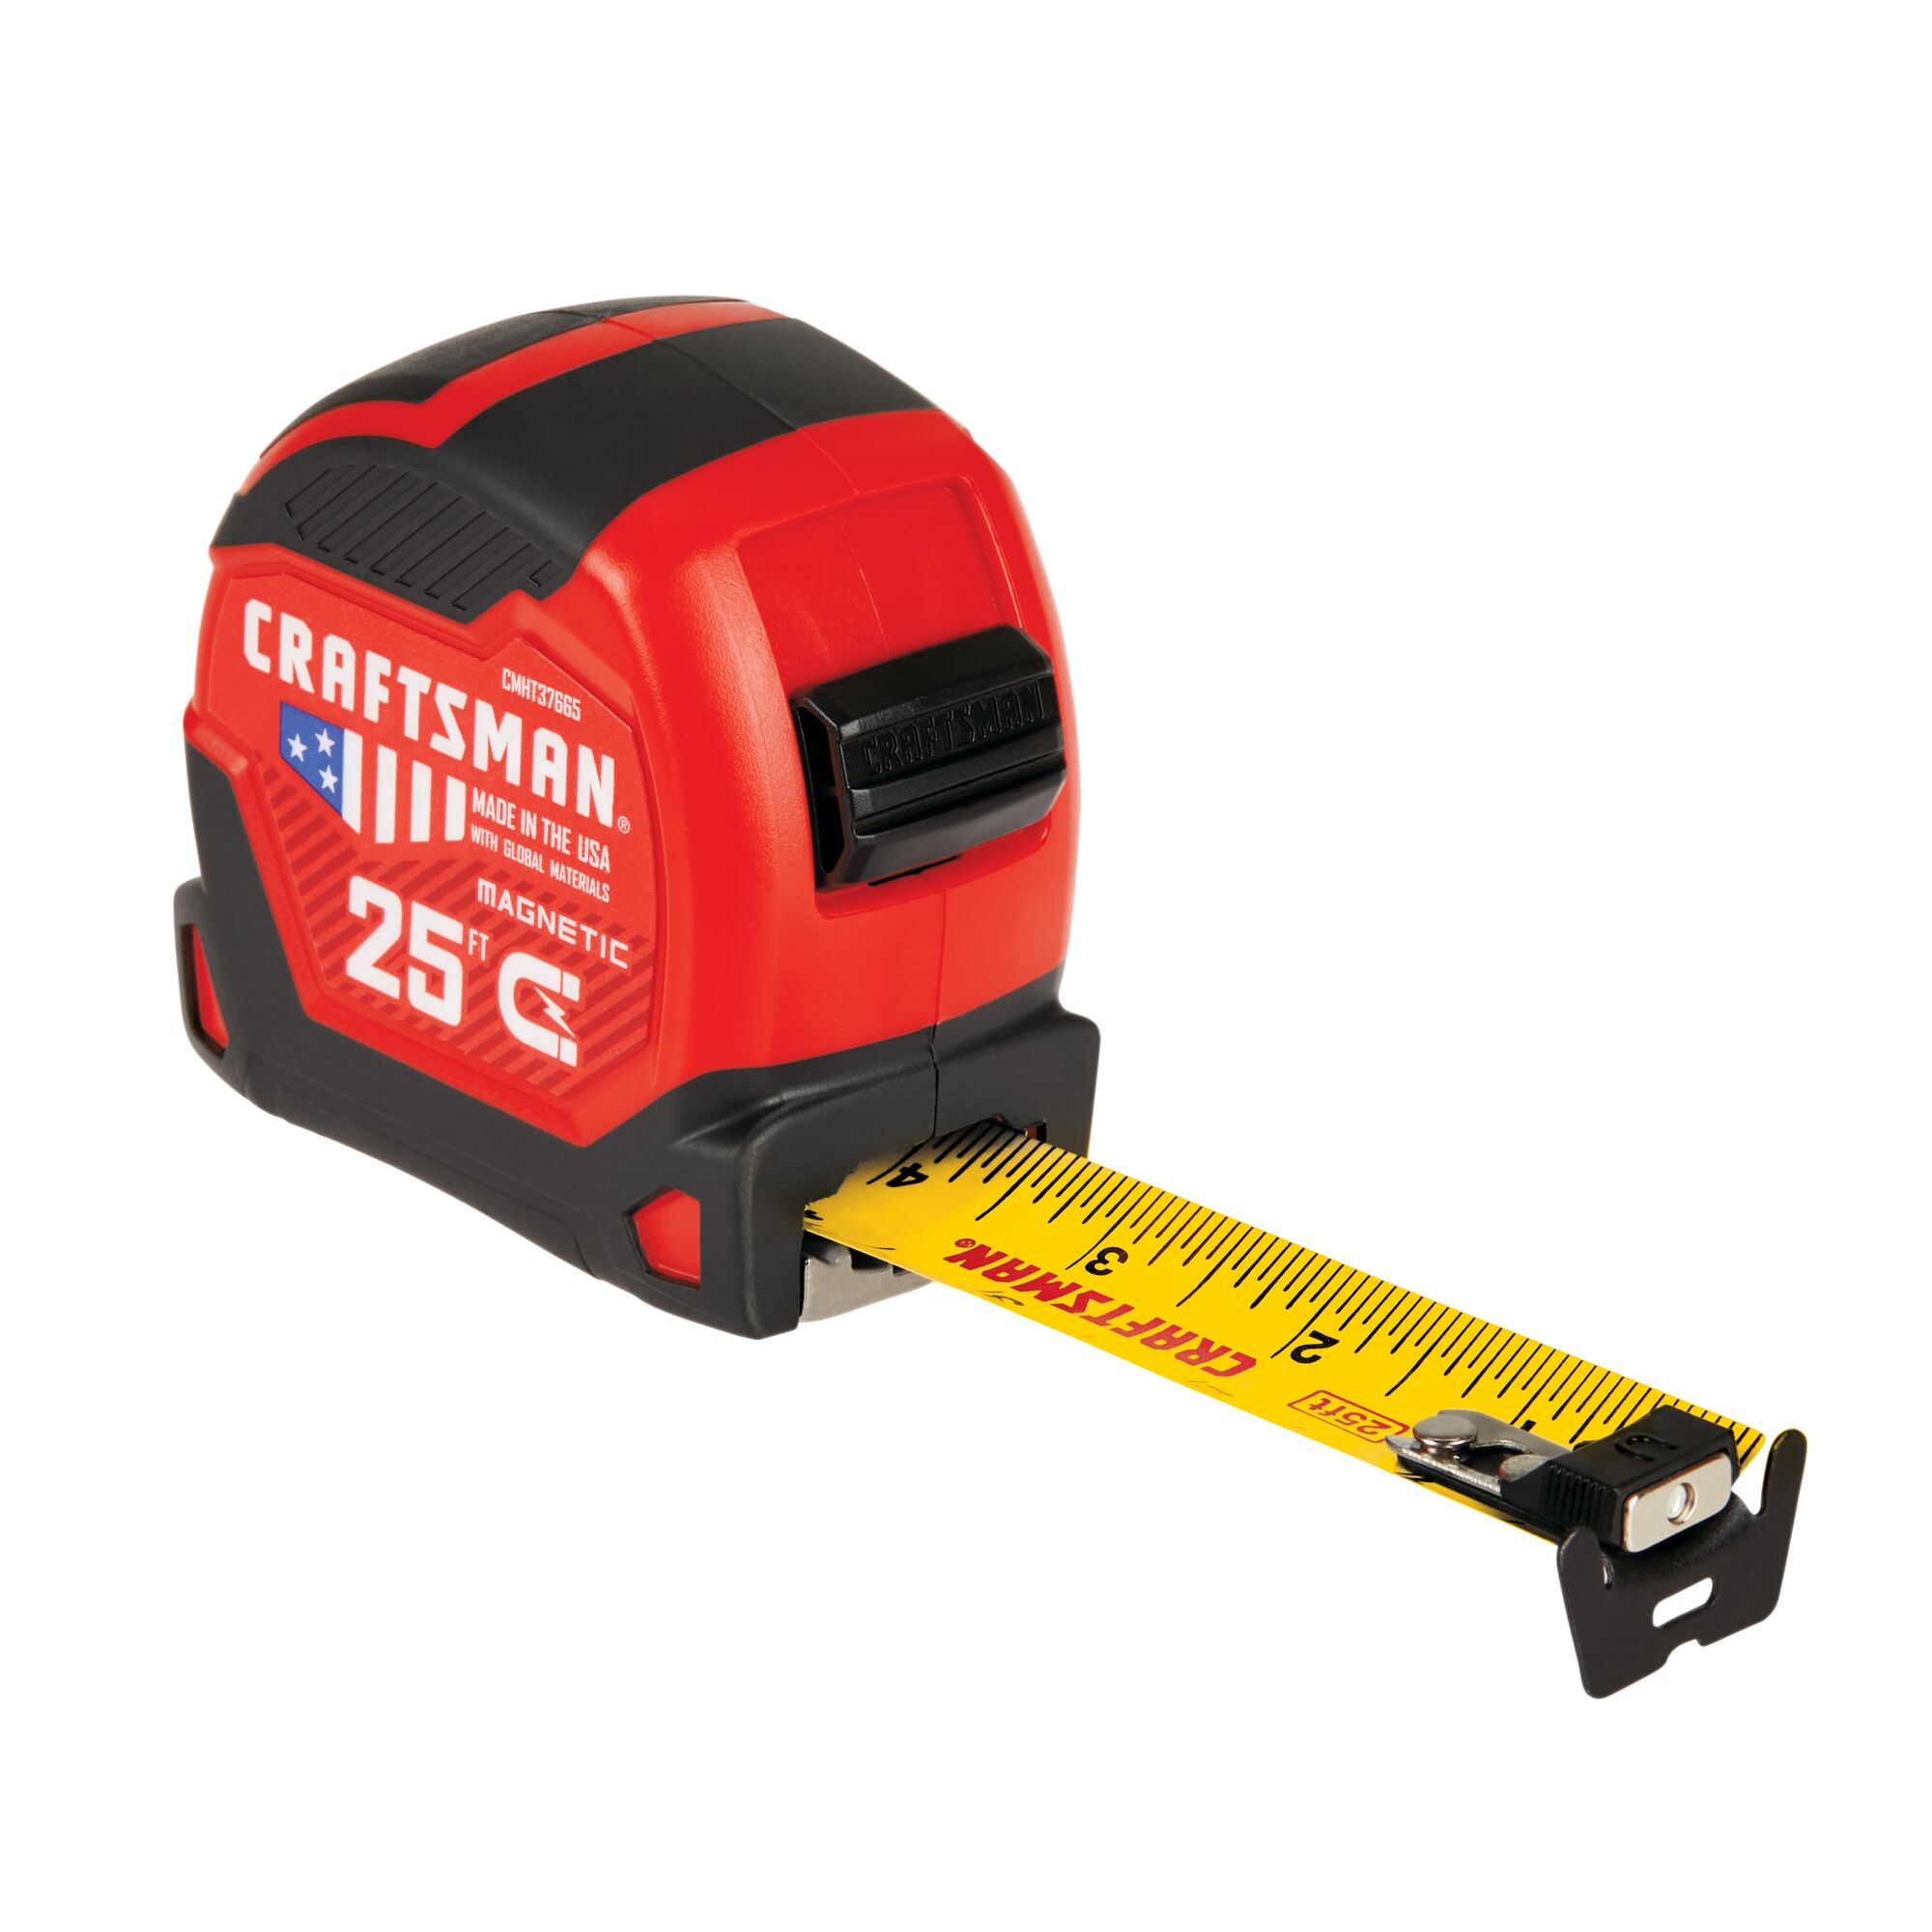 Pro Reach 25 ft. Magnetic Tape Measure | CRAFTSMAN